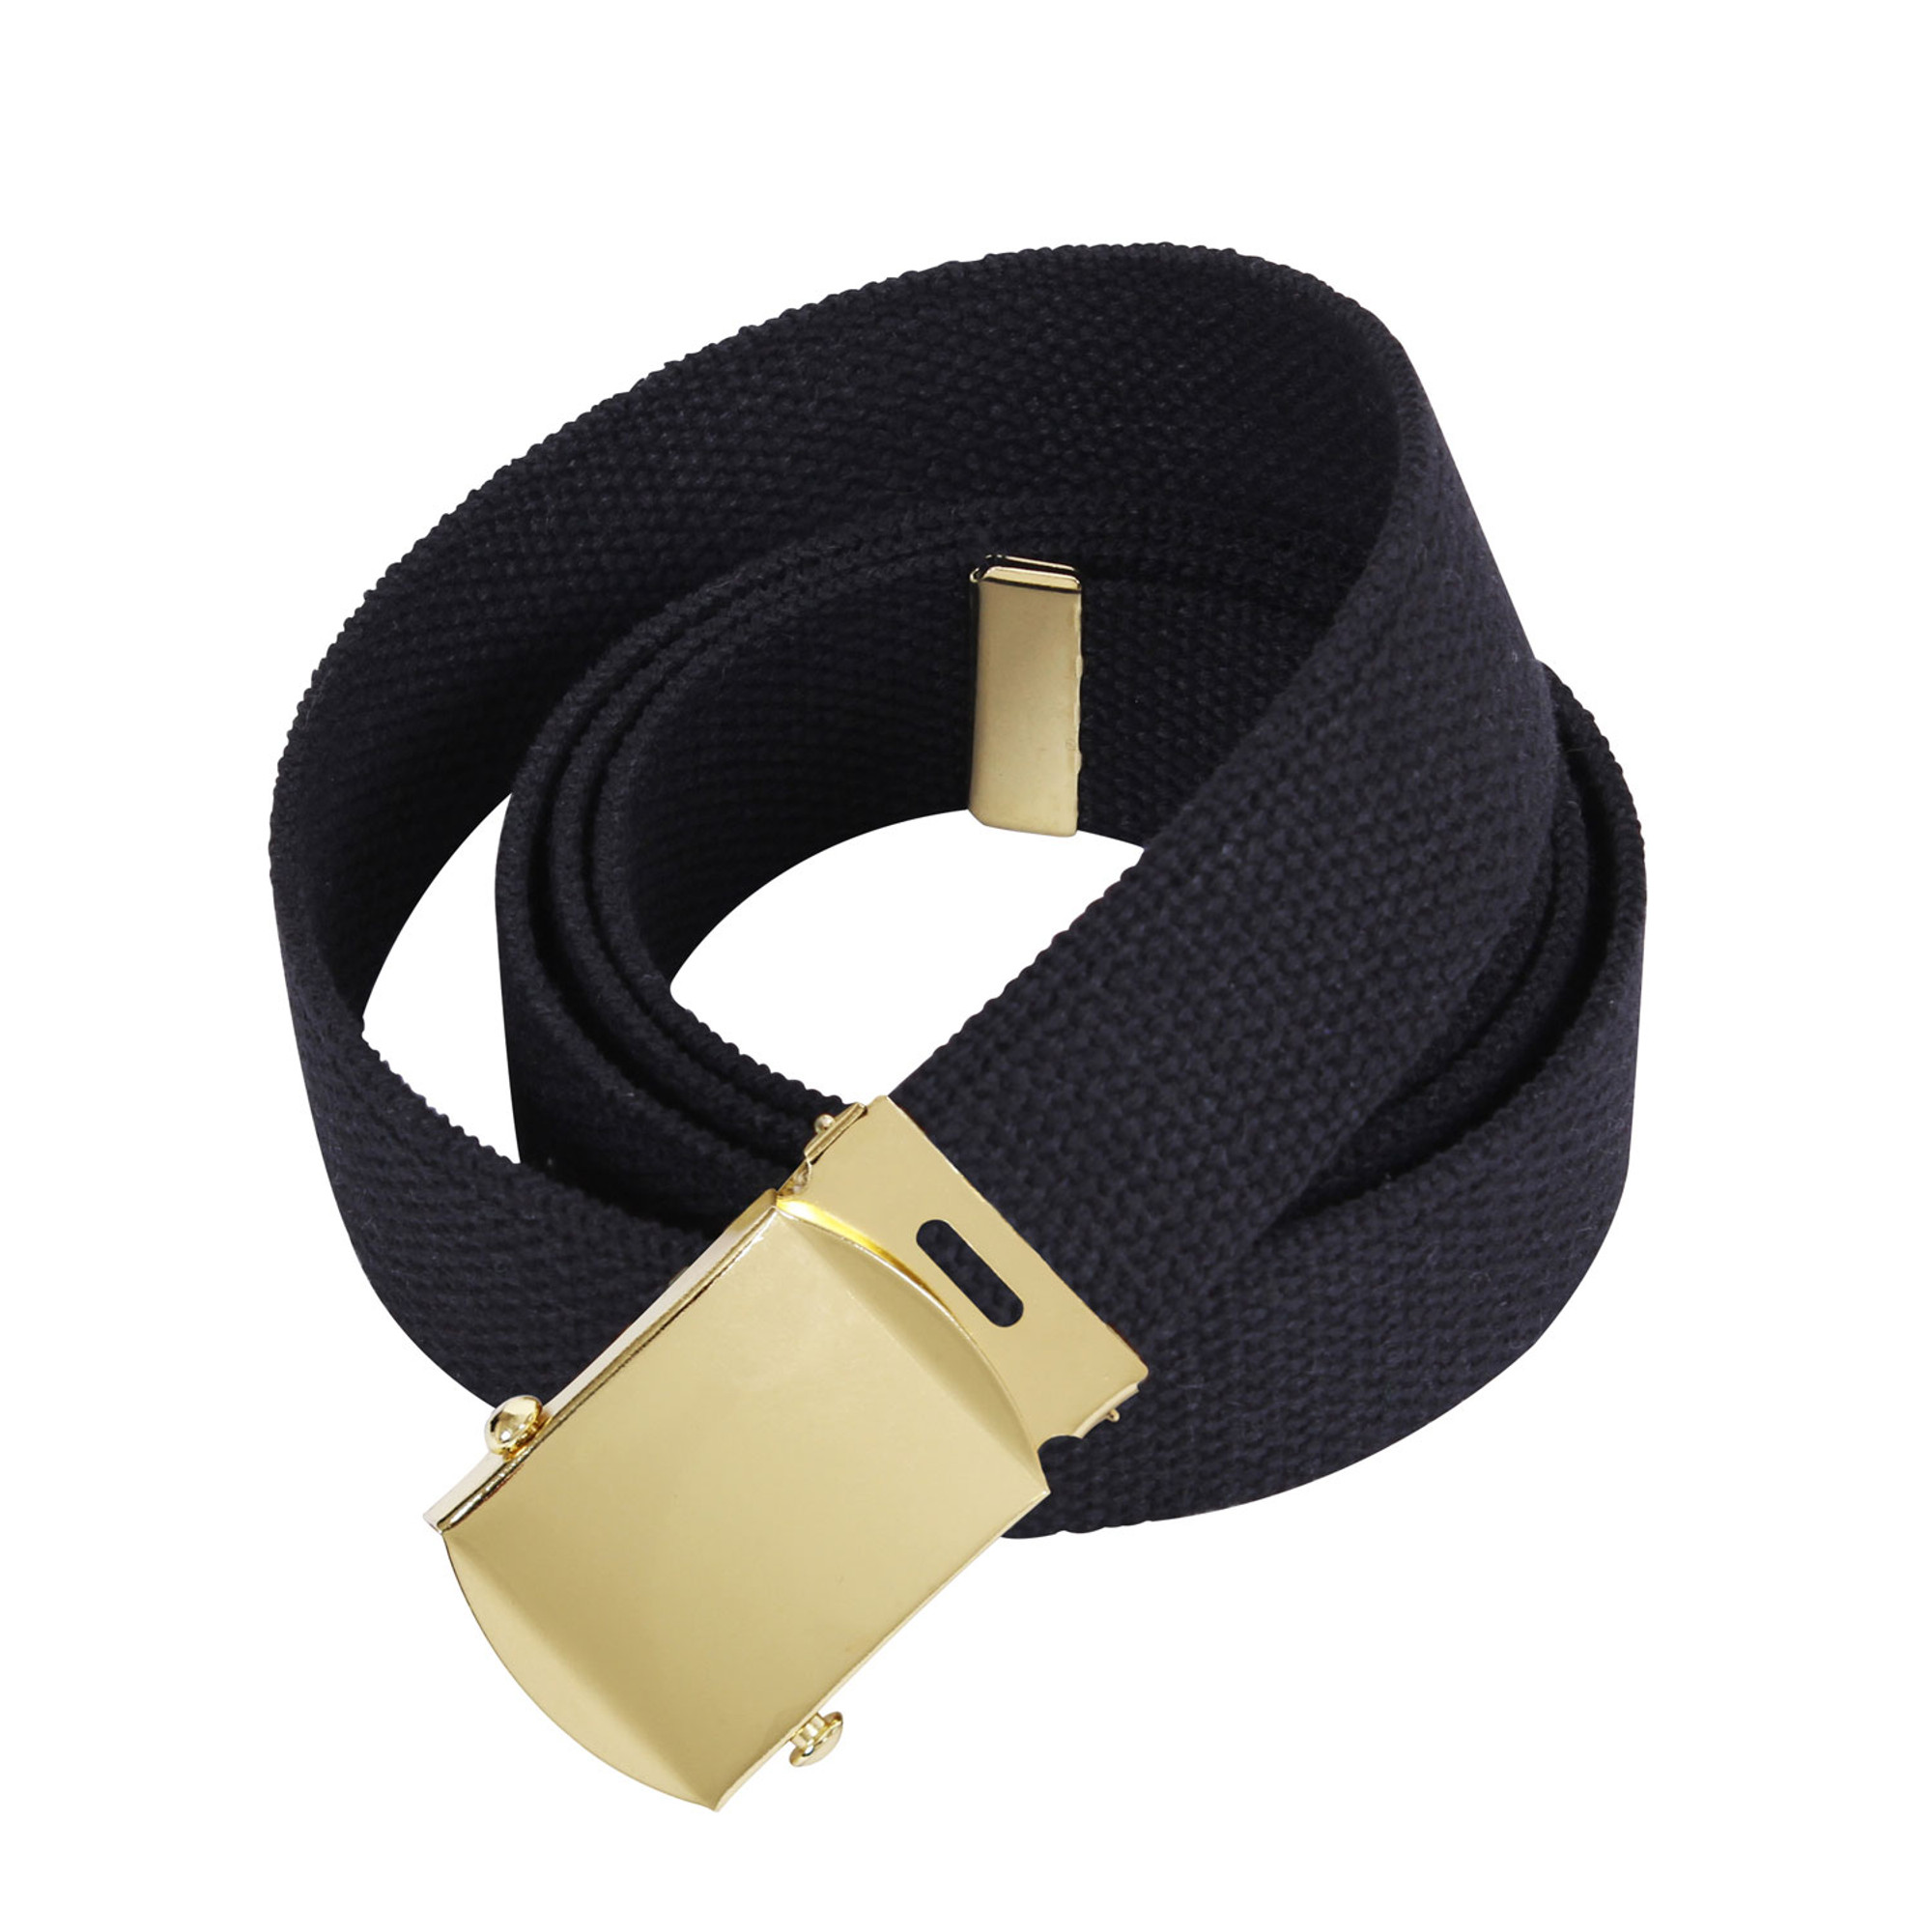 Rothco Military Web Belts - 44 Inches Long - Black/Gold